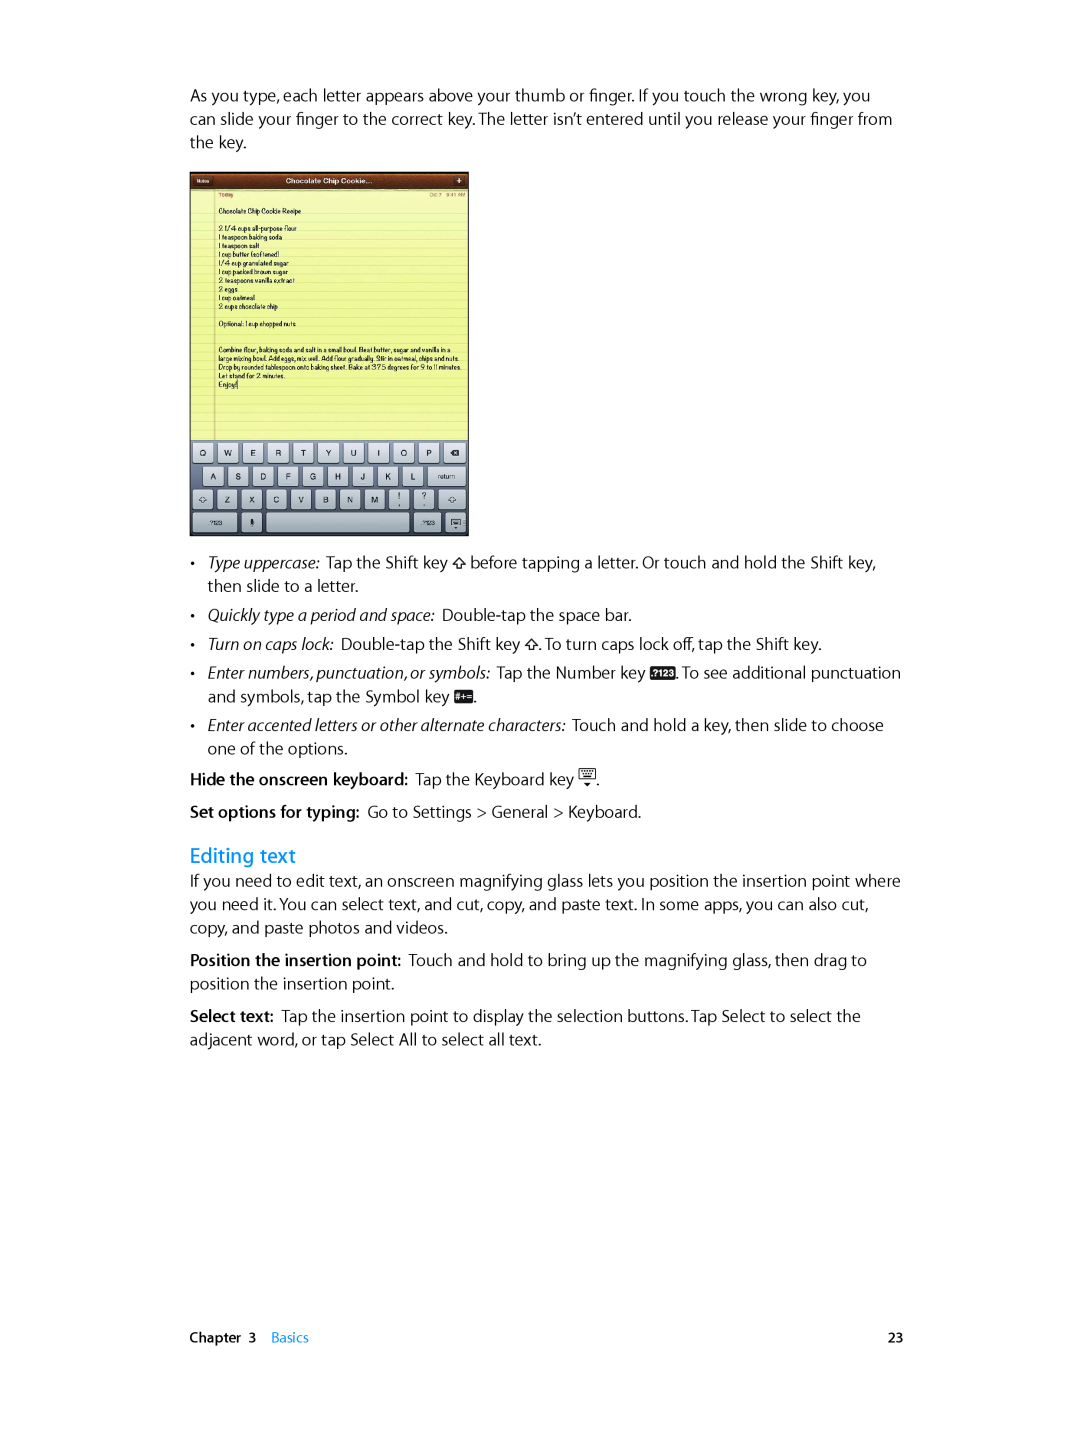 Apple ME218LL/A Editing text, Quickly type a period and space Double-tap the space bar, and symbols, tap the Symbol key 